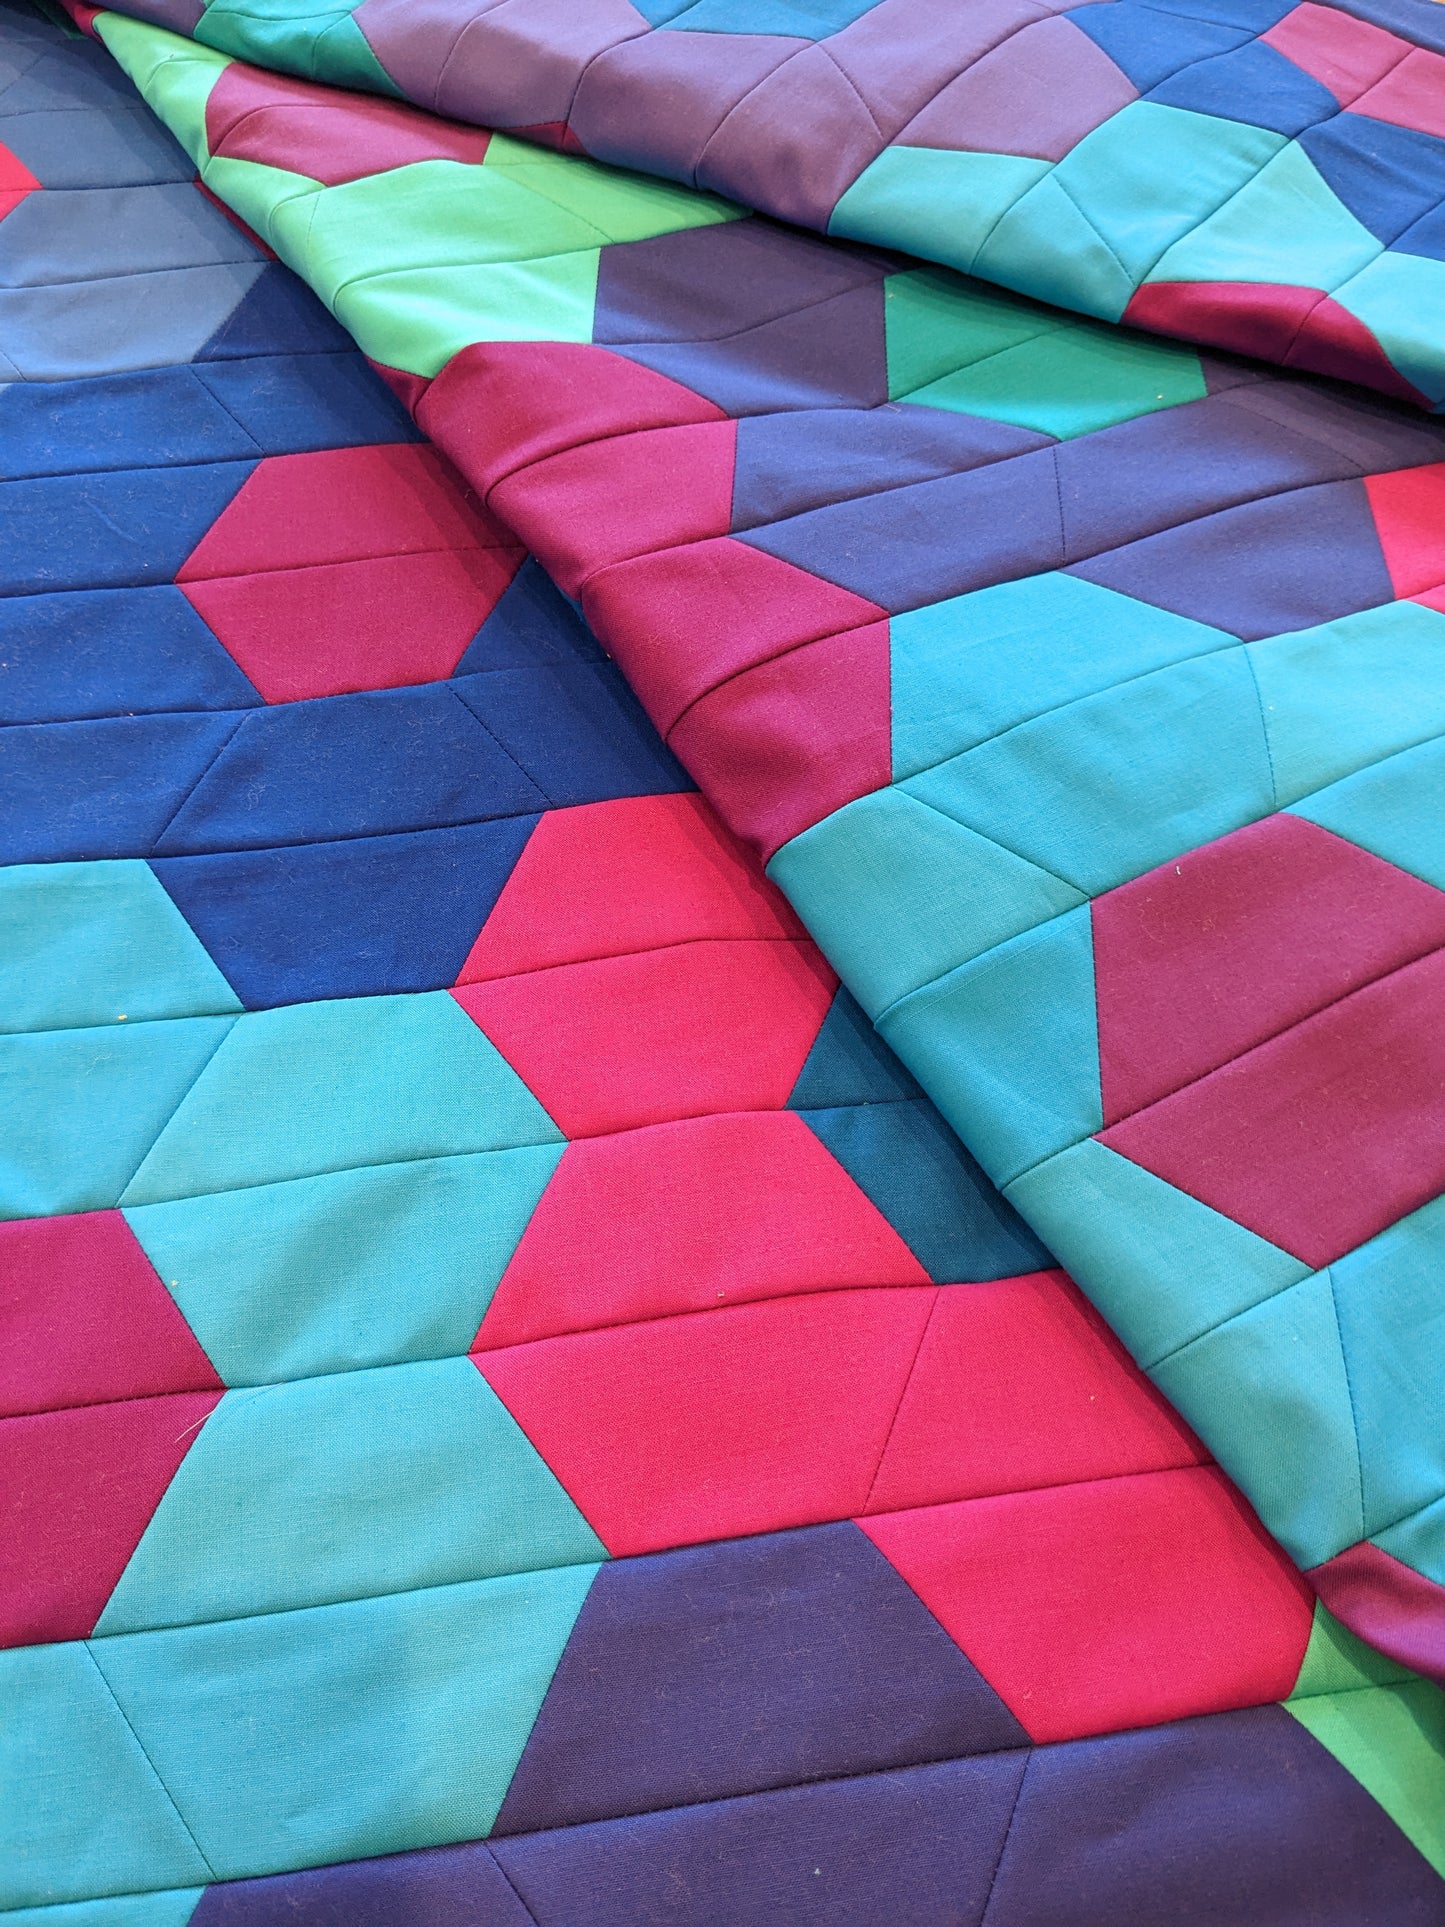 quilt with blue, purple and pink hexagon flowers folded